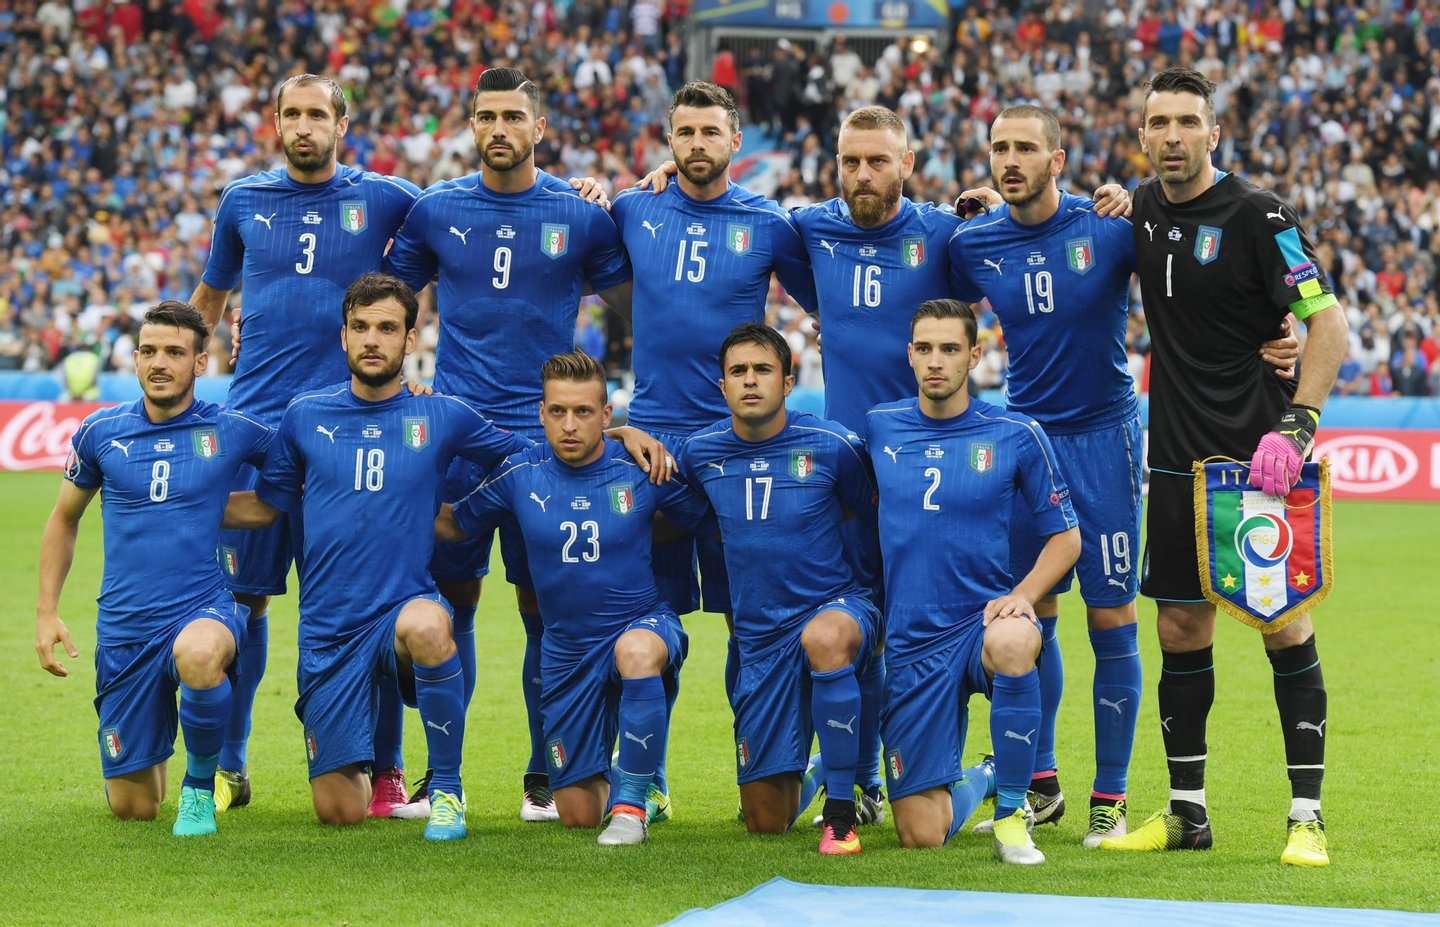 PARIS, FRANCE - JUNE 27: Italy players line up for the team photos prior to the UEFA EURO 2016 round of 16 match between Italy and Spain at Stade de France on June 27, 2016 in Paris, France. (Photo by Matthias Hangst/Getty Images)